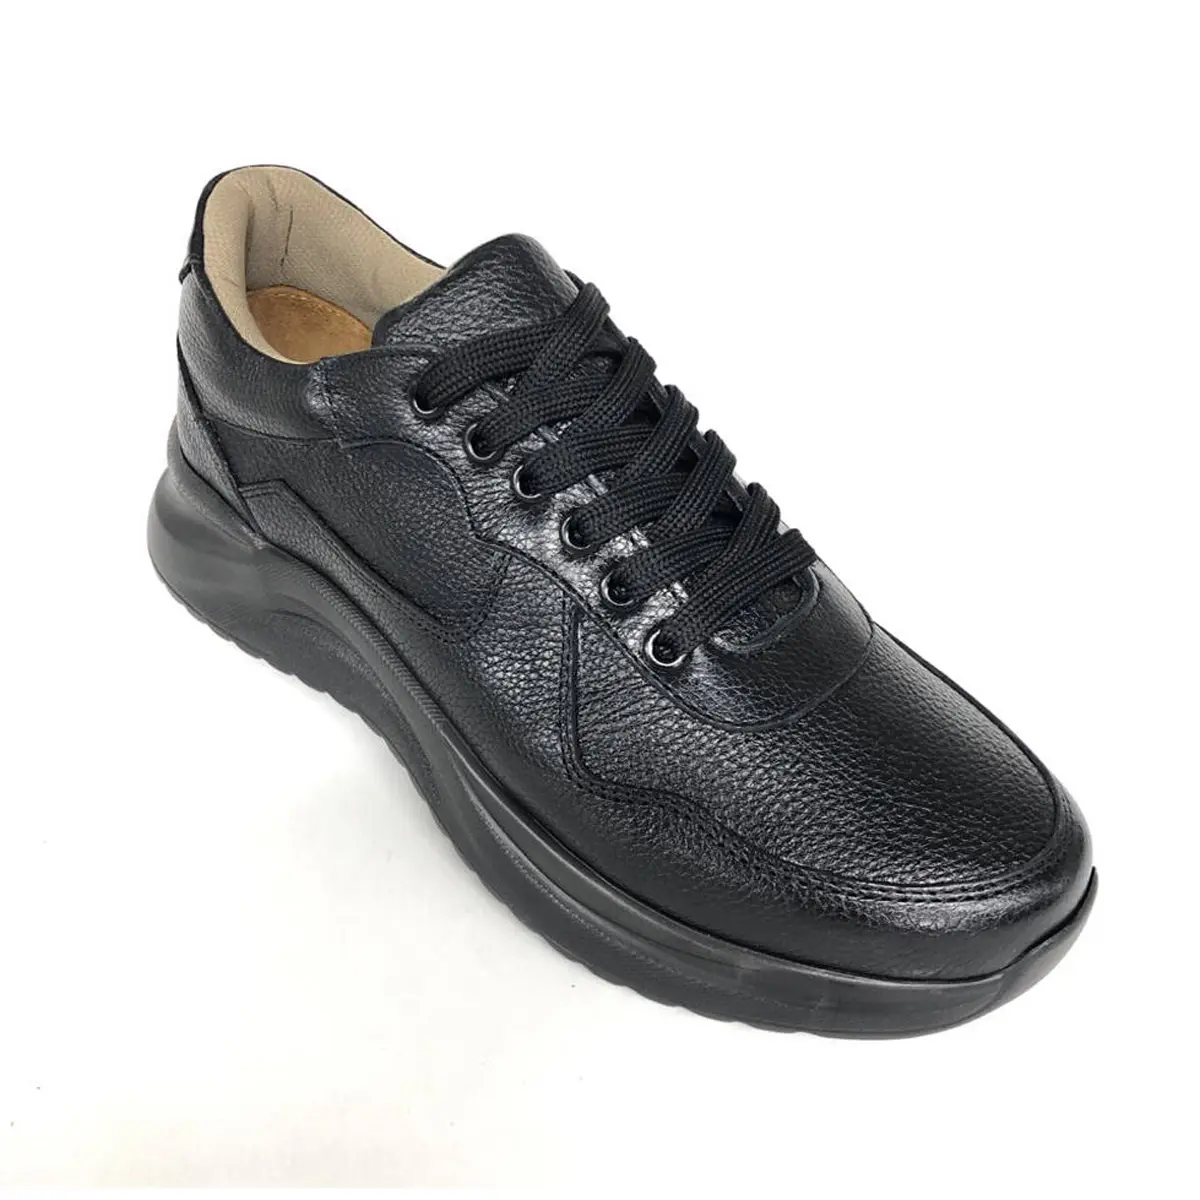 Men's leather sneakers casual style made in Uzbekistan high quality shoes whole sale